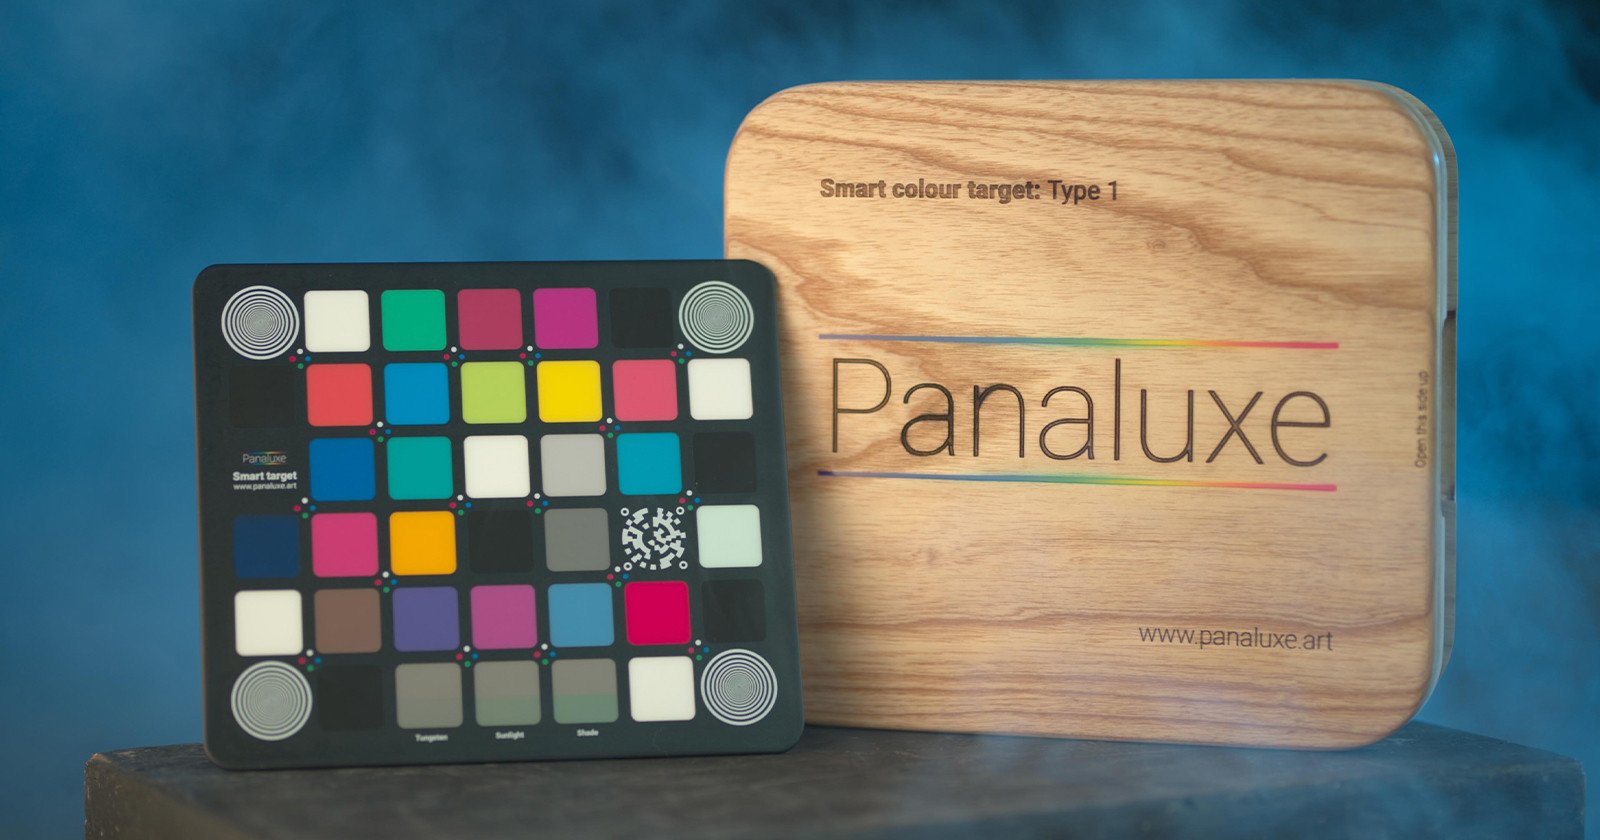  panaluxe smart can instantly color-match any scene 